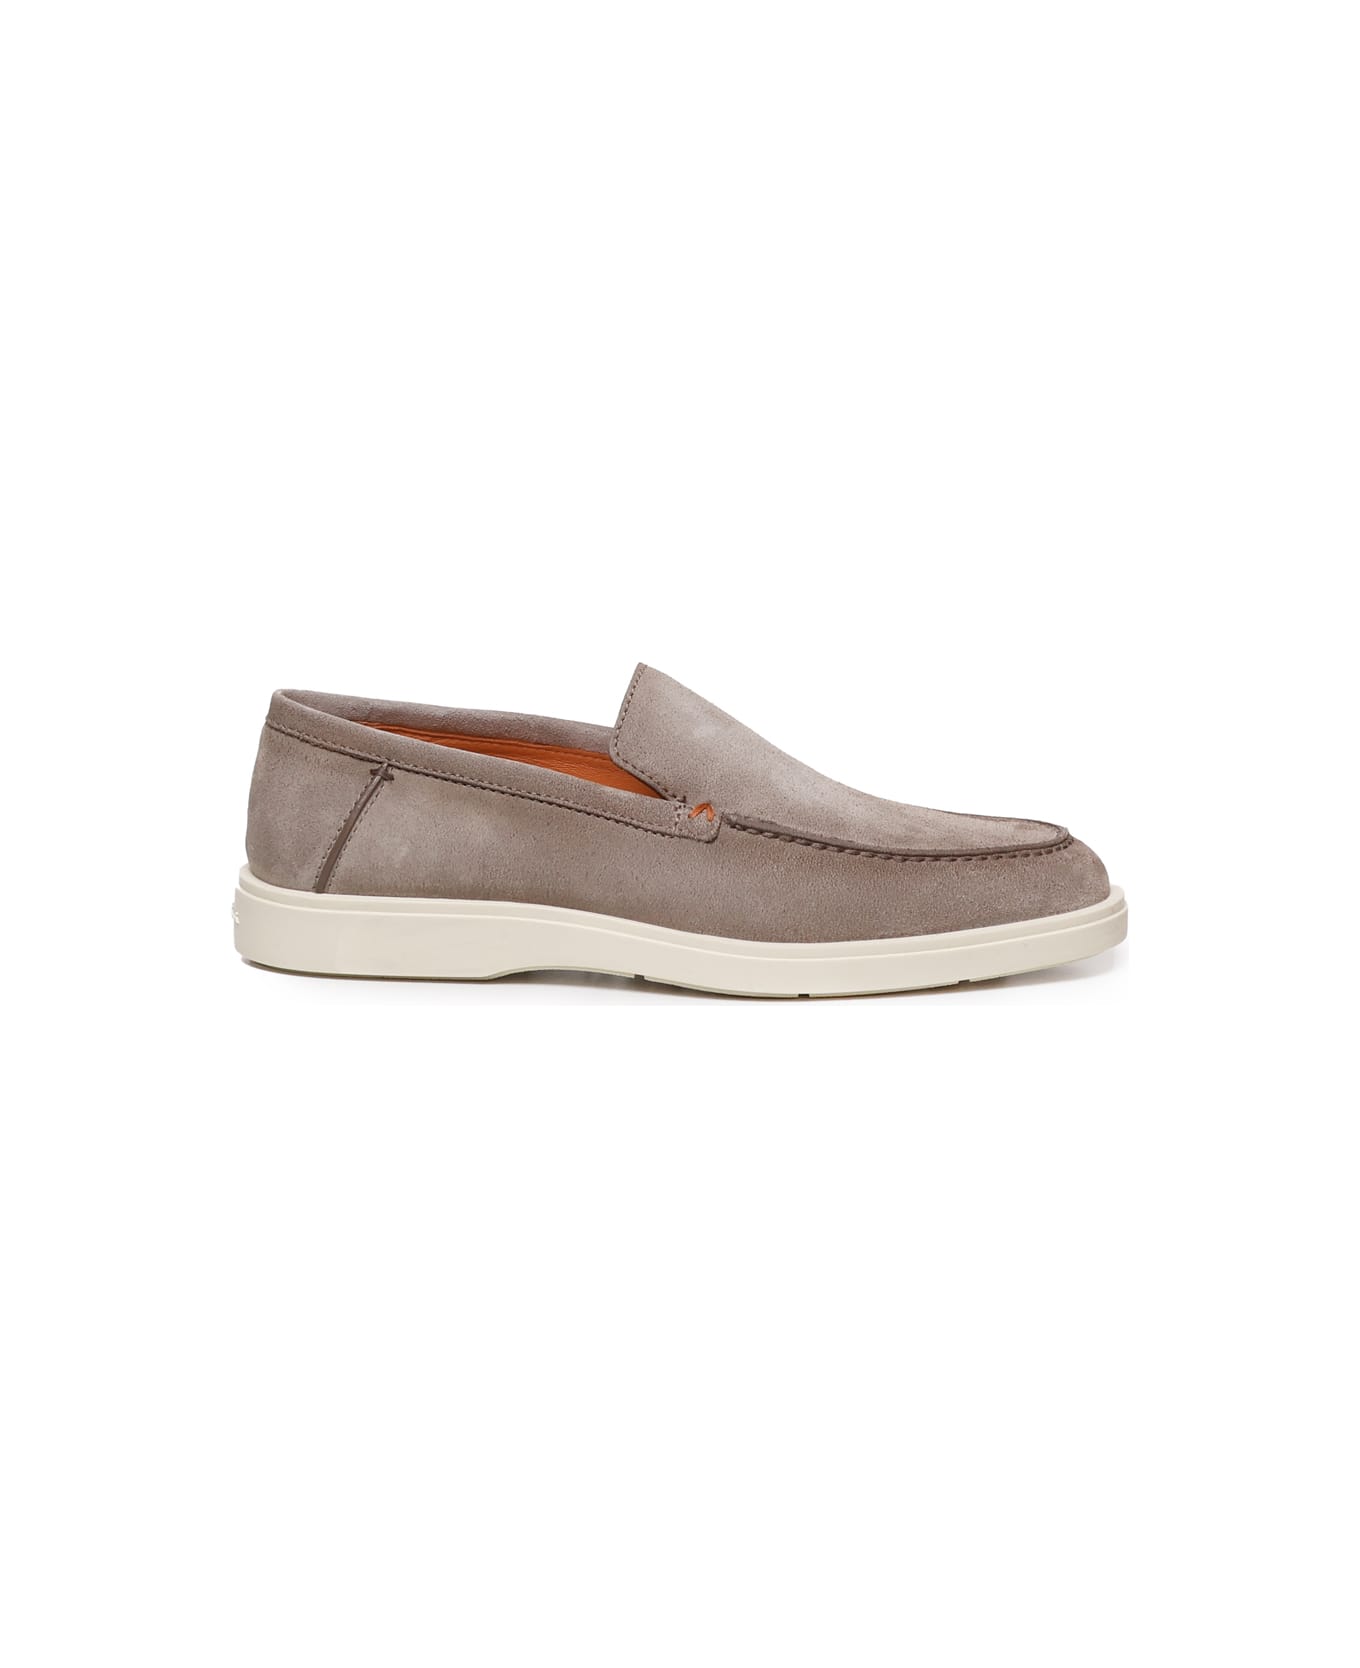 Santoni Loafers In Taupe Nabuk - Taupe